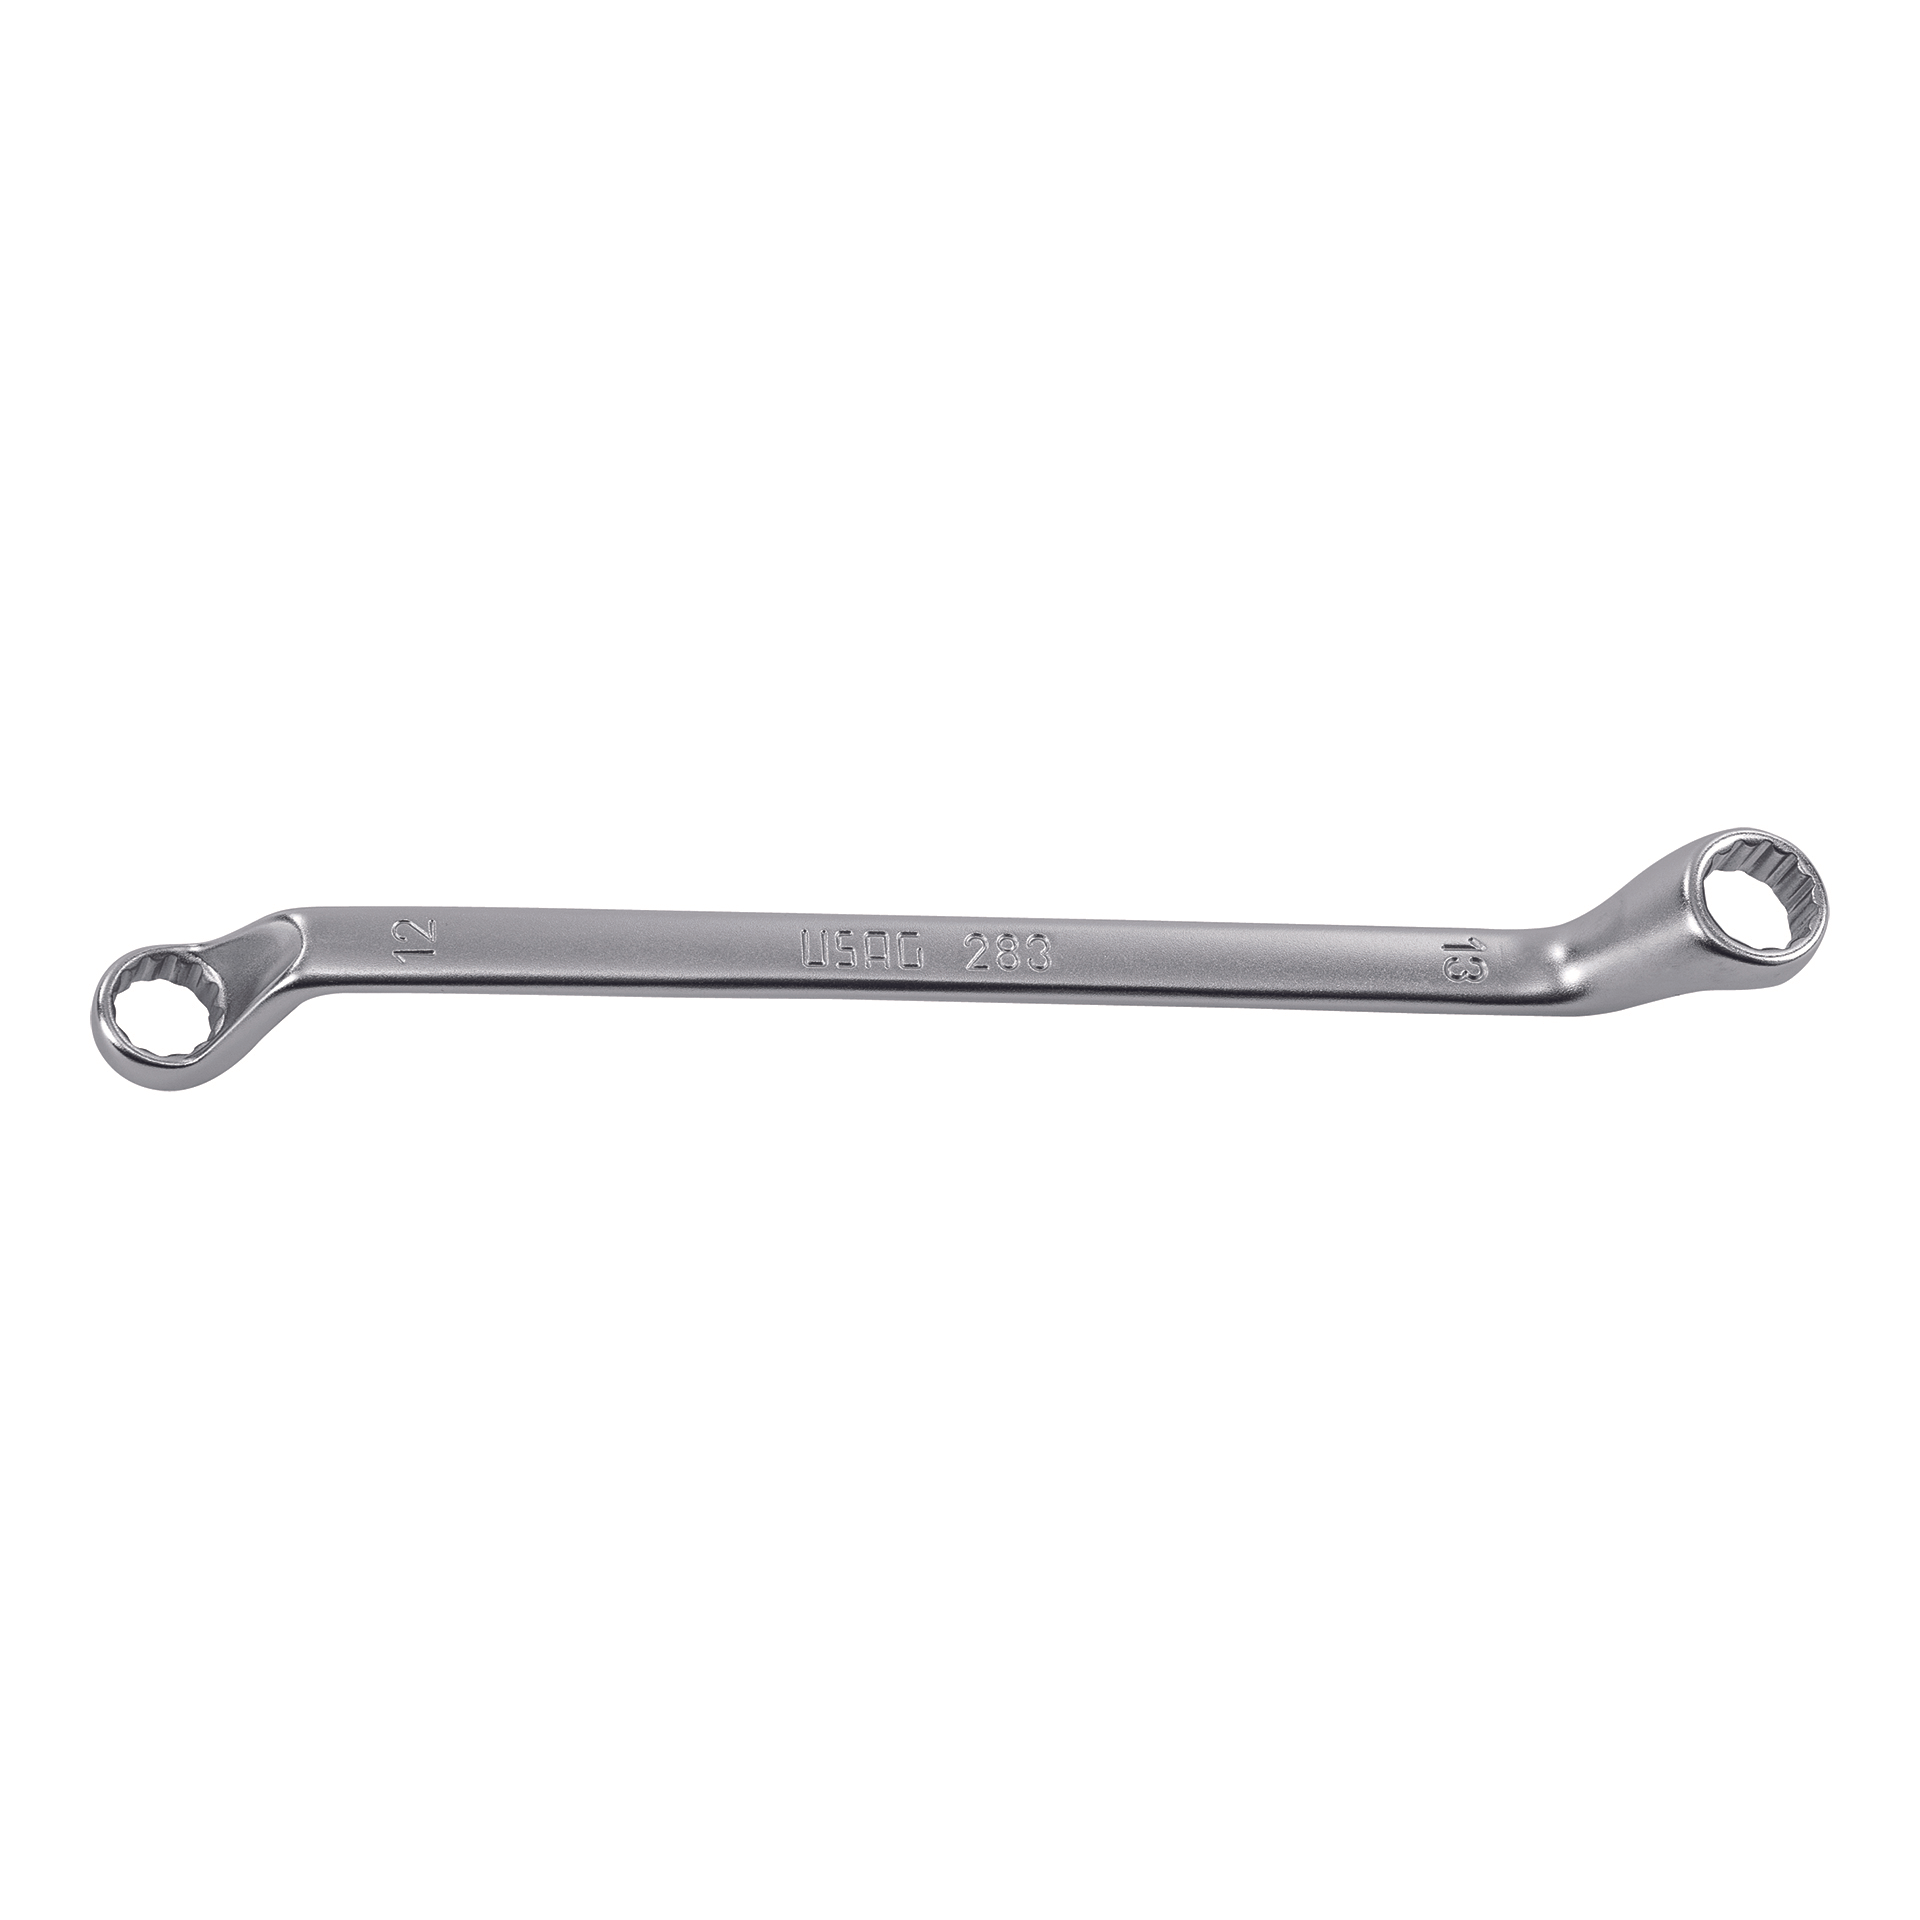 Double Ended offset bihexagonal ring wrenches - Usag 285 L